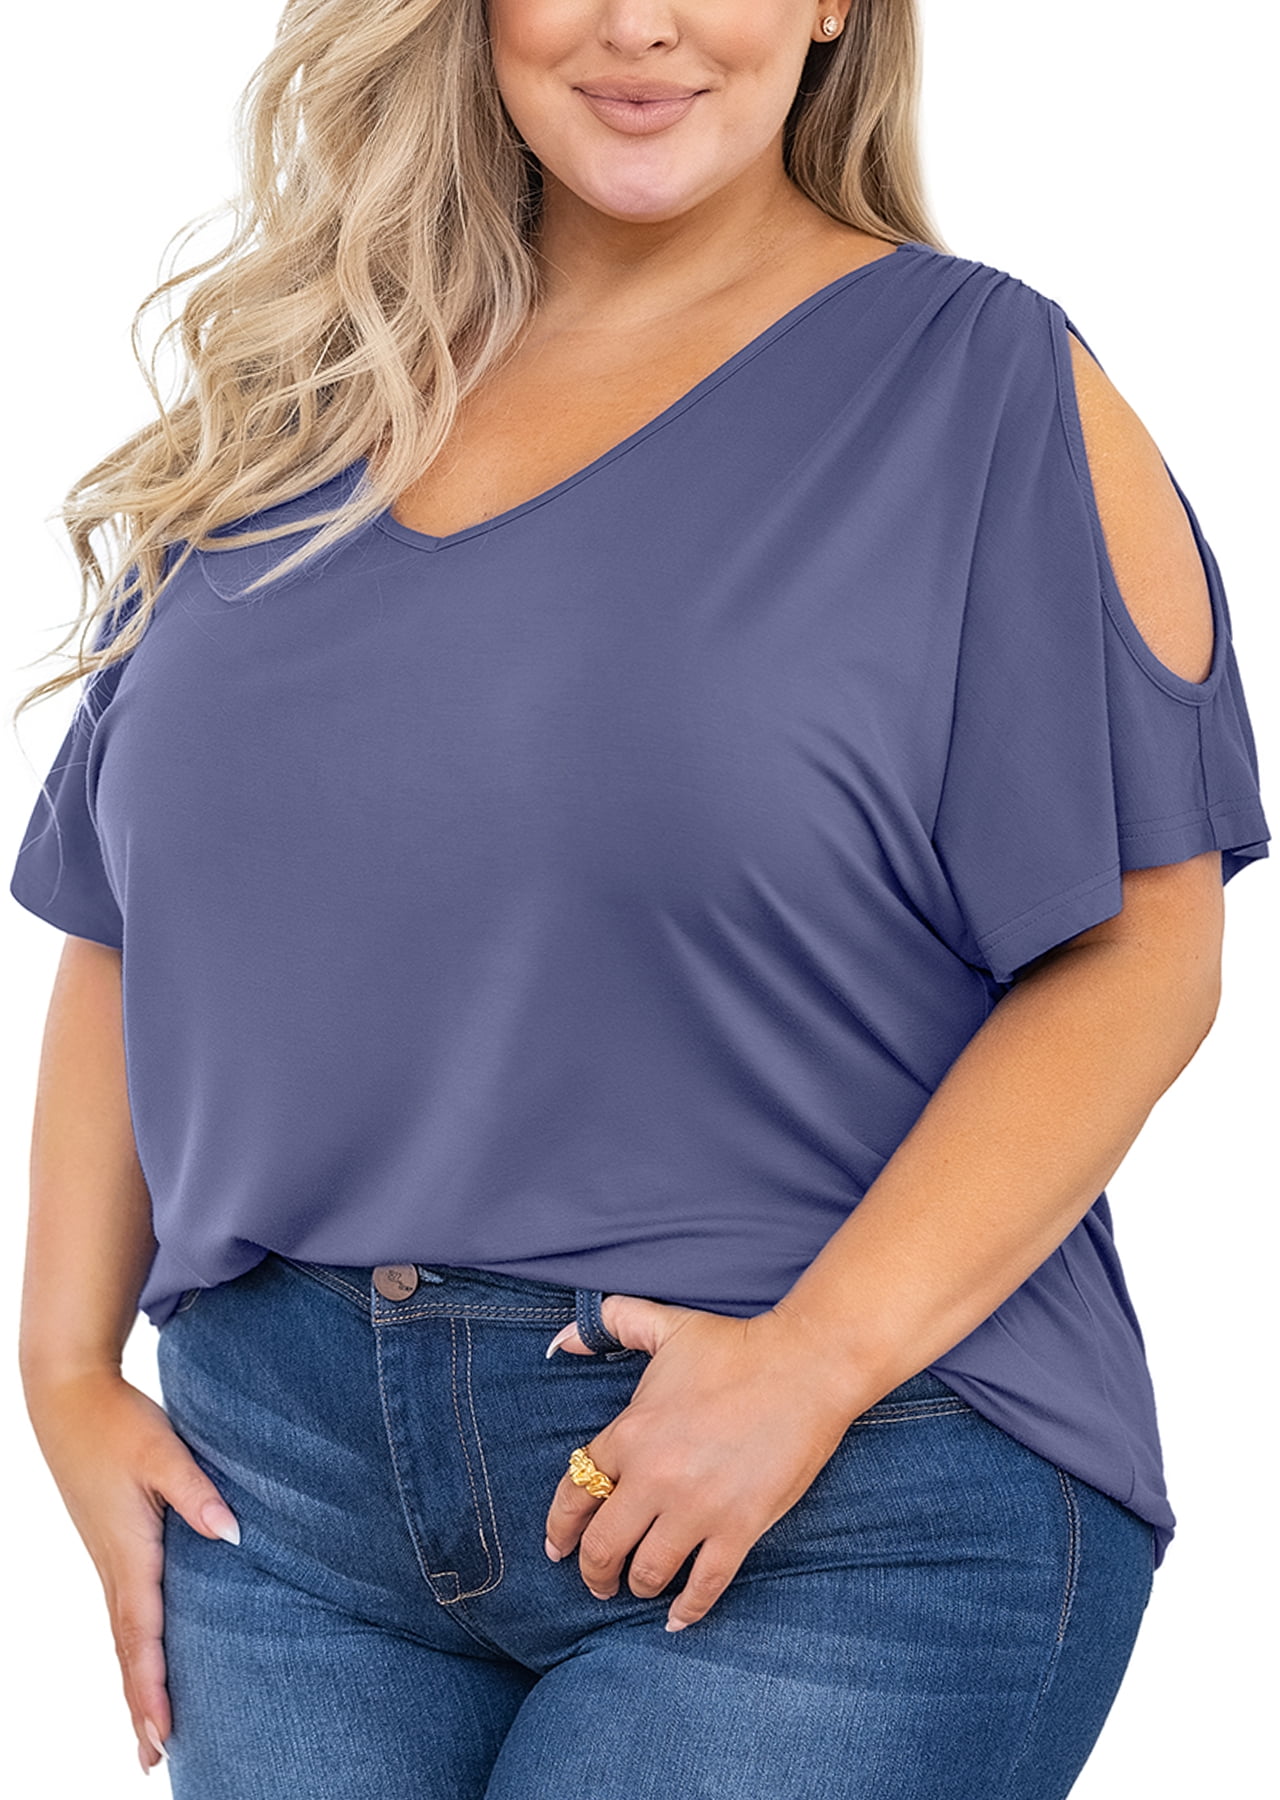 SHOWMALL Plus Size Tops for Women Cold Shoulder Clothes Navy Blue 1X Blouse  Short Sleeve Clothing V Neck Tunic Summer Shirts 